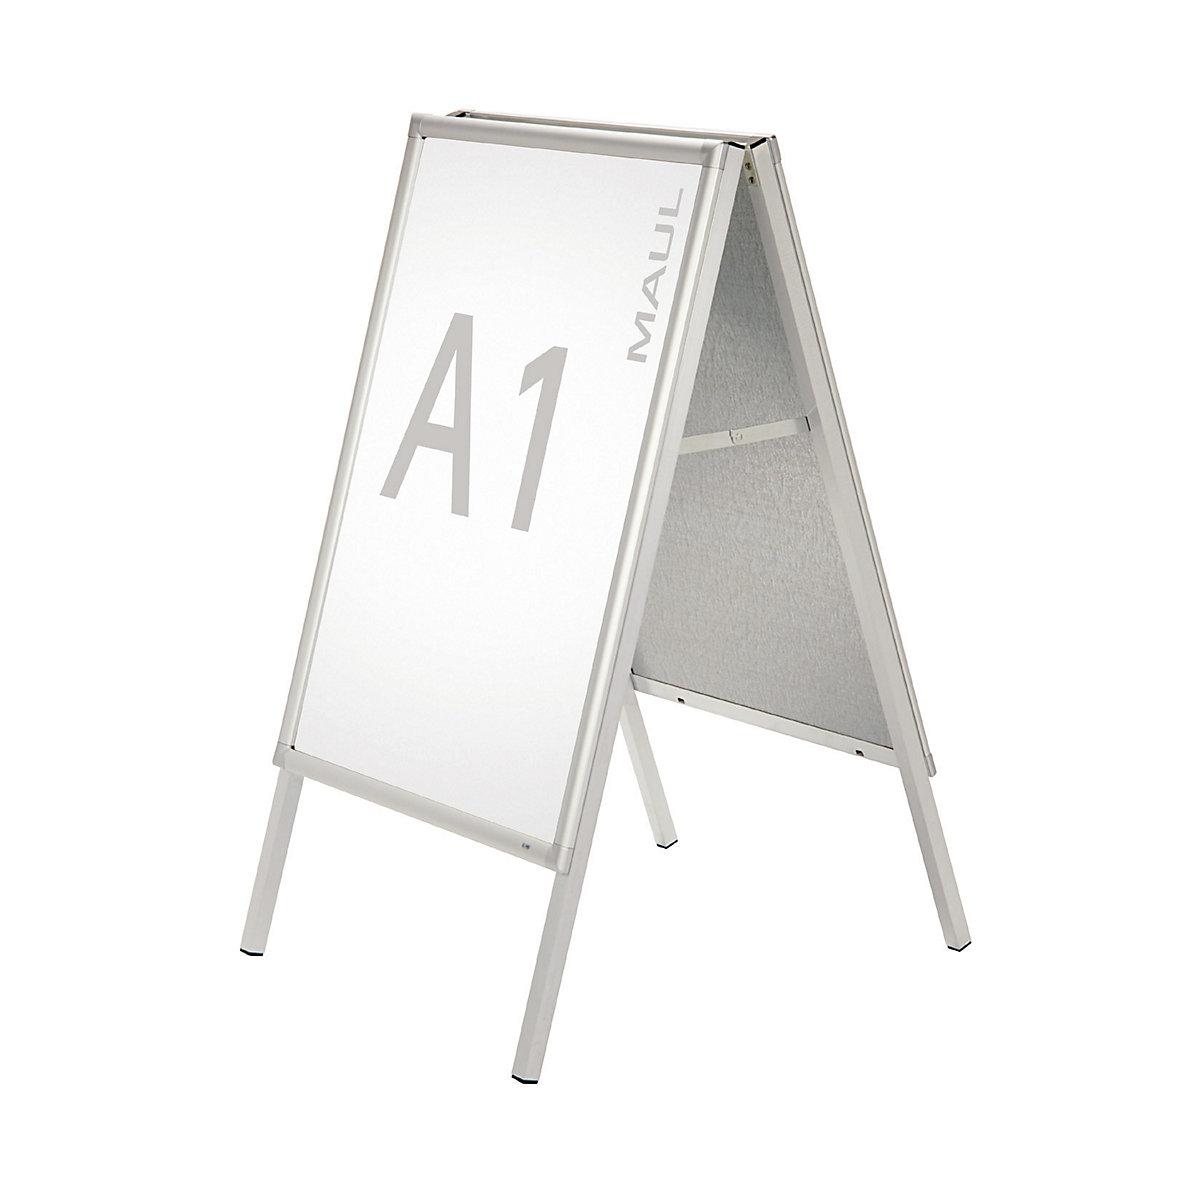 Display stand, double sided – MAUL, aluminium, weatherproof, for A1-2